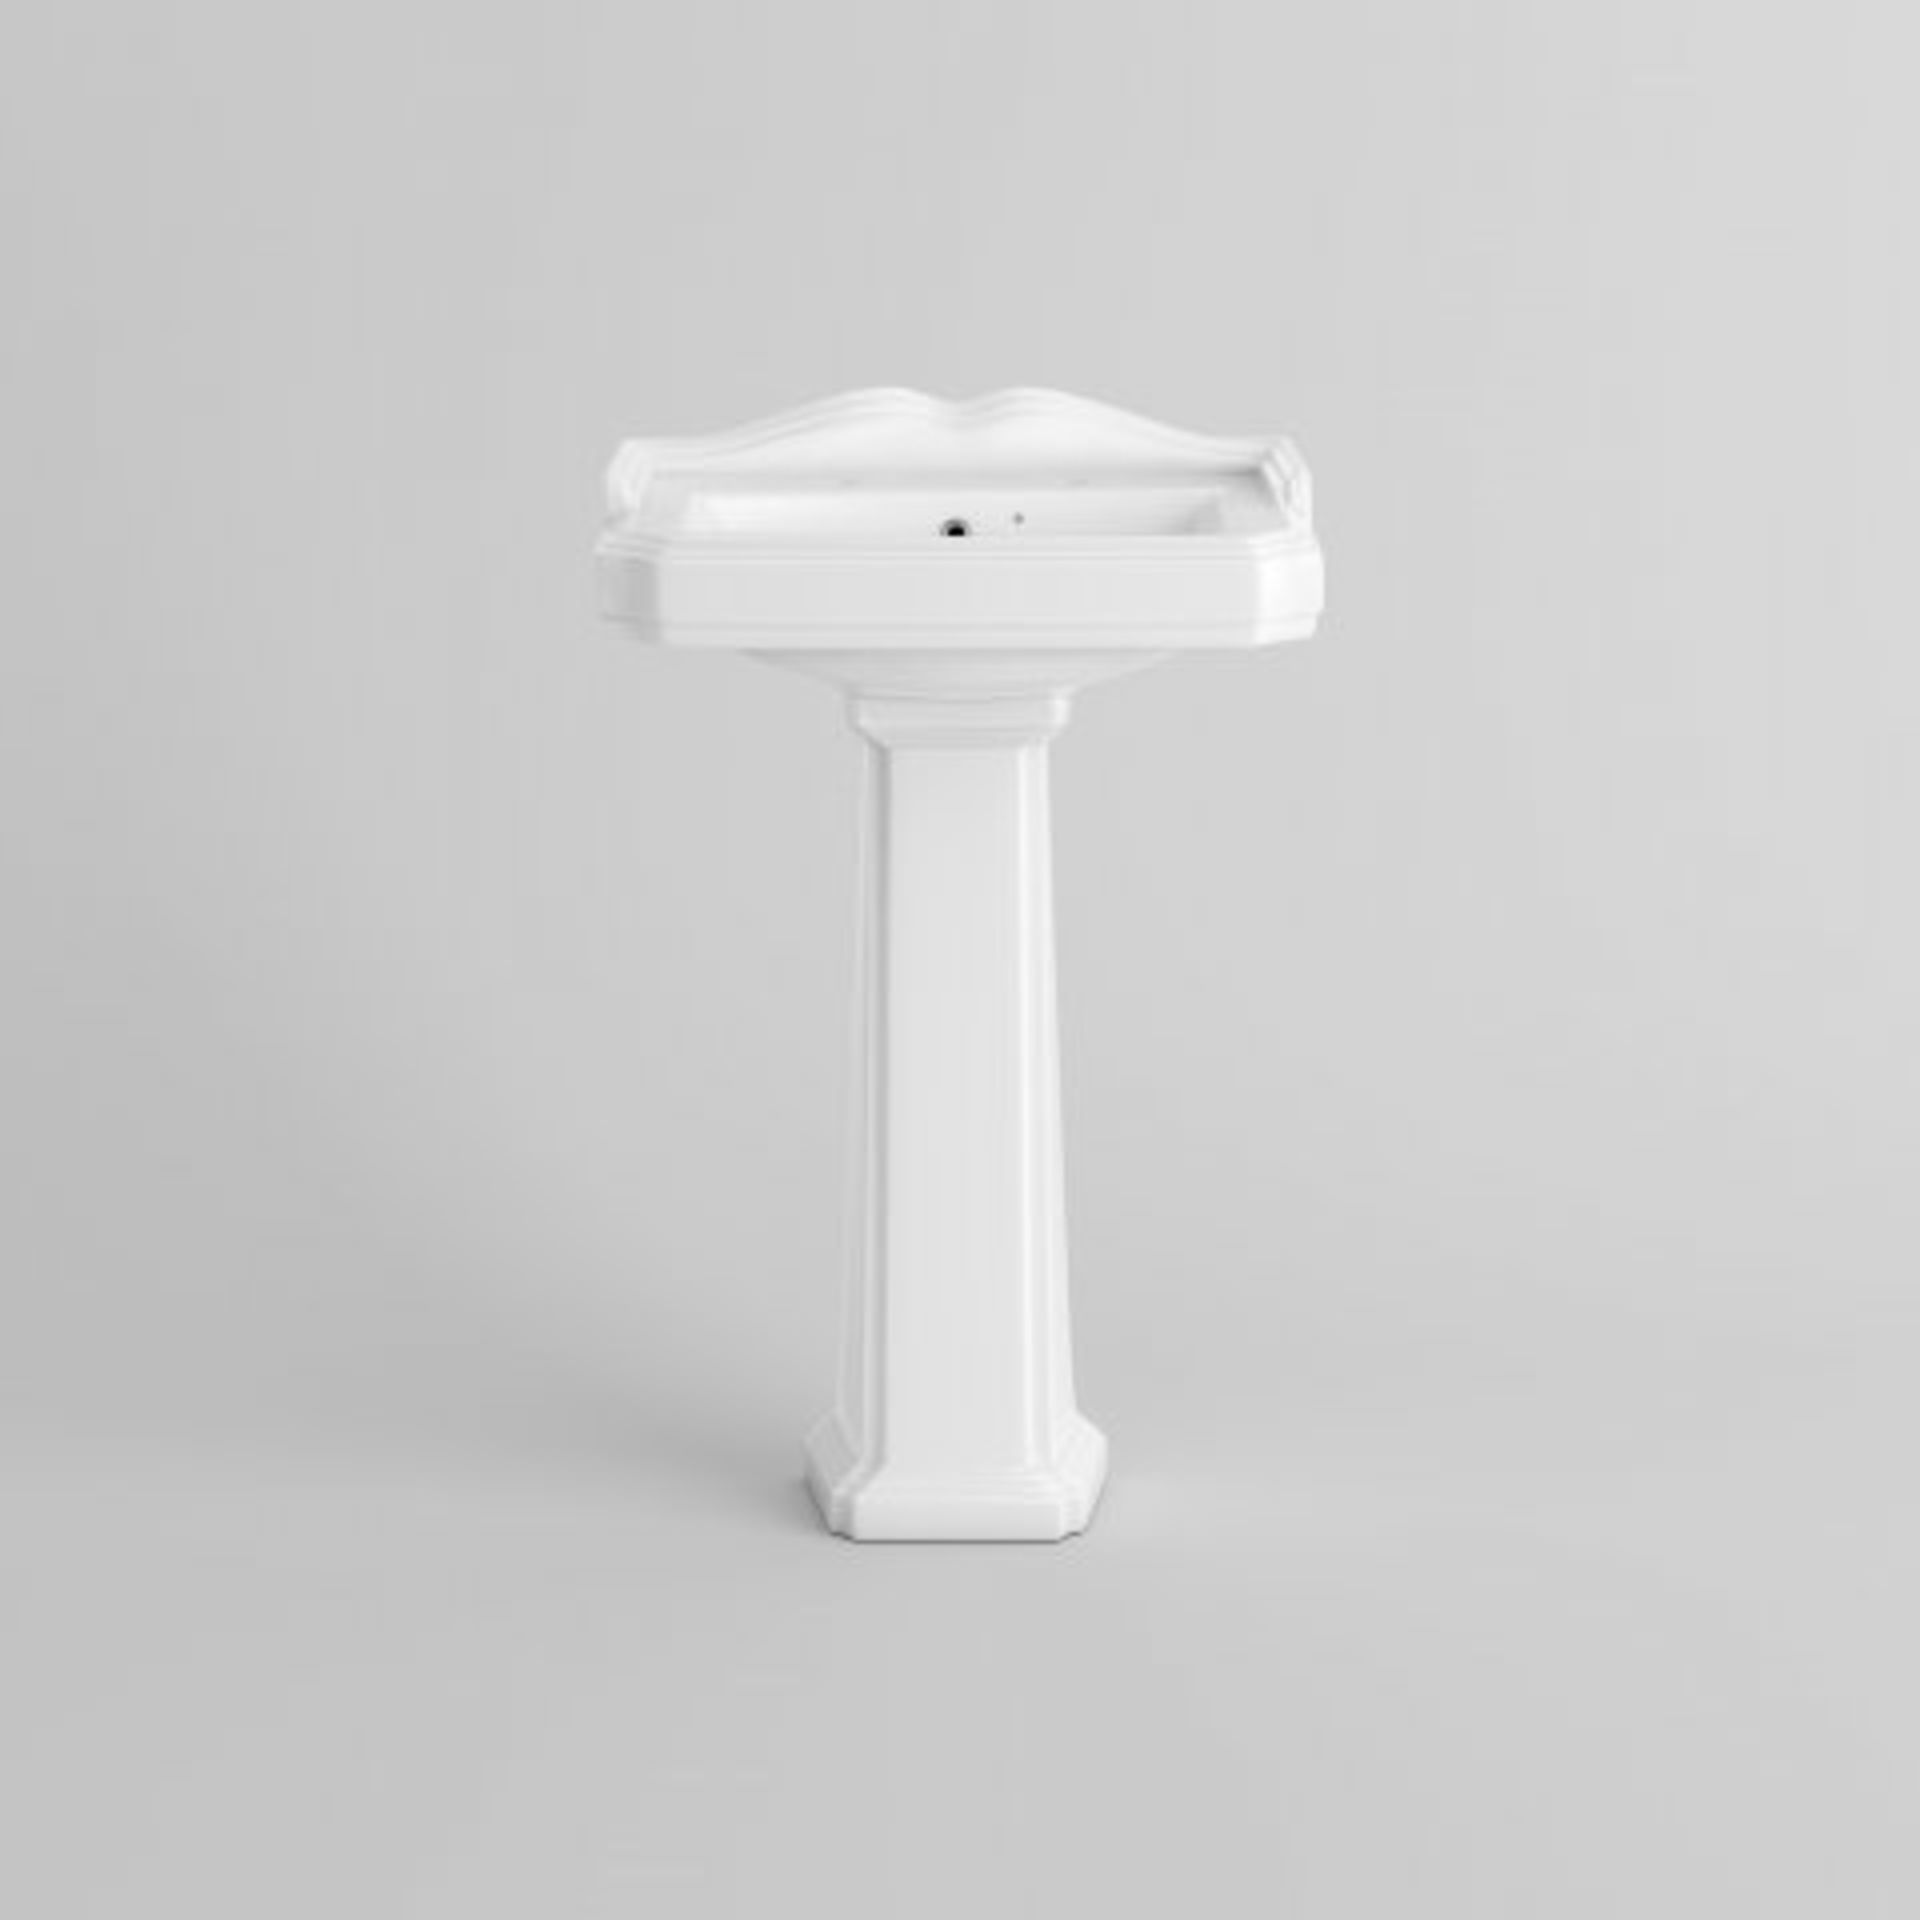 (AA217) Victoria Basin & Pedestal - Double Tap Hole. RRP £175.99. This traditional basin, - Image 3 of 4